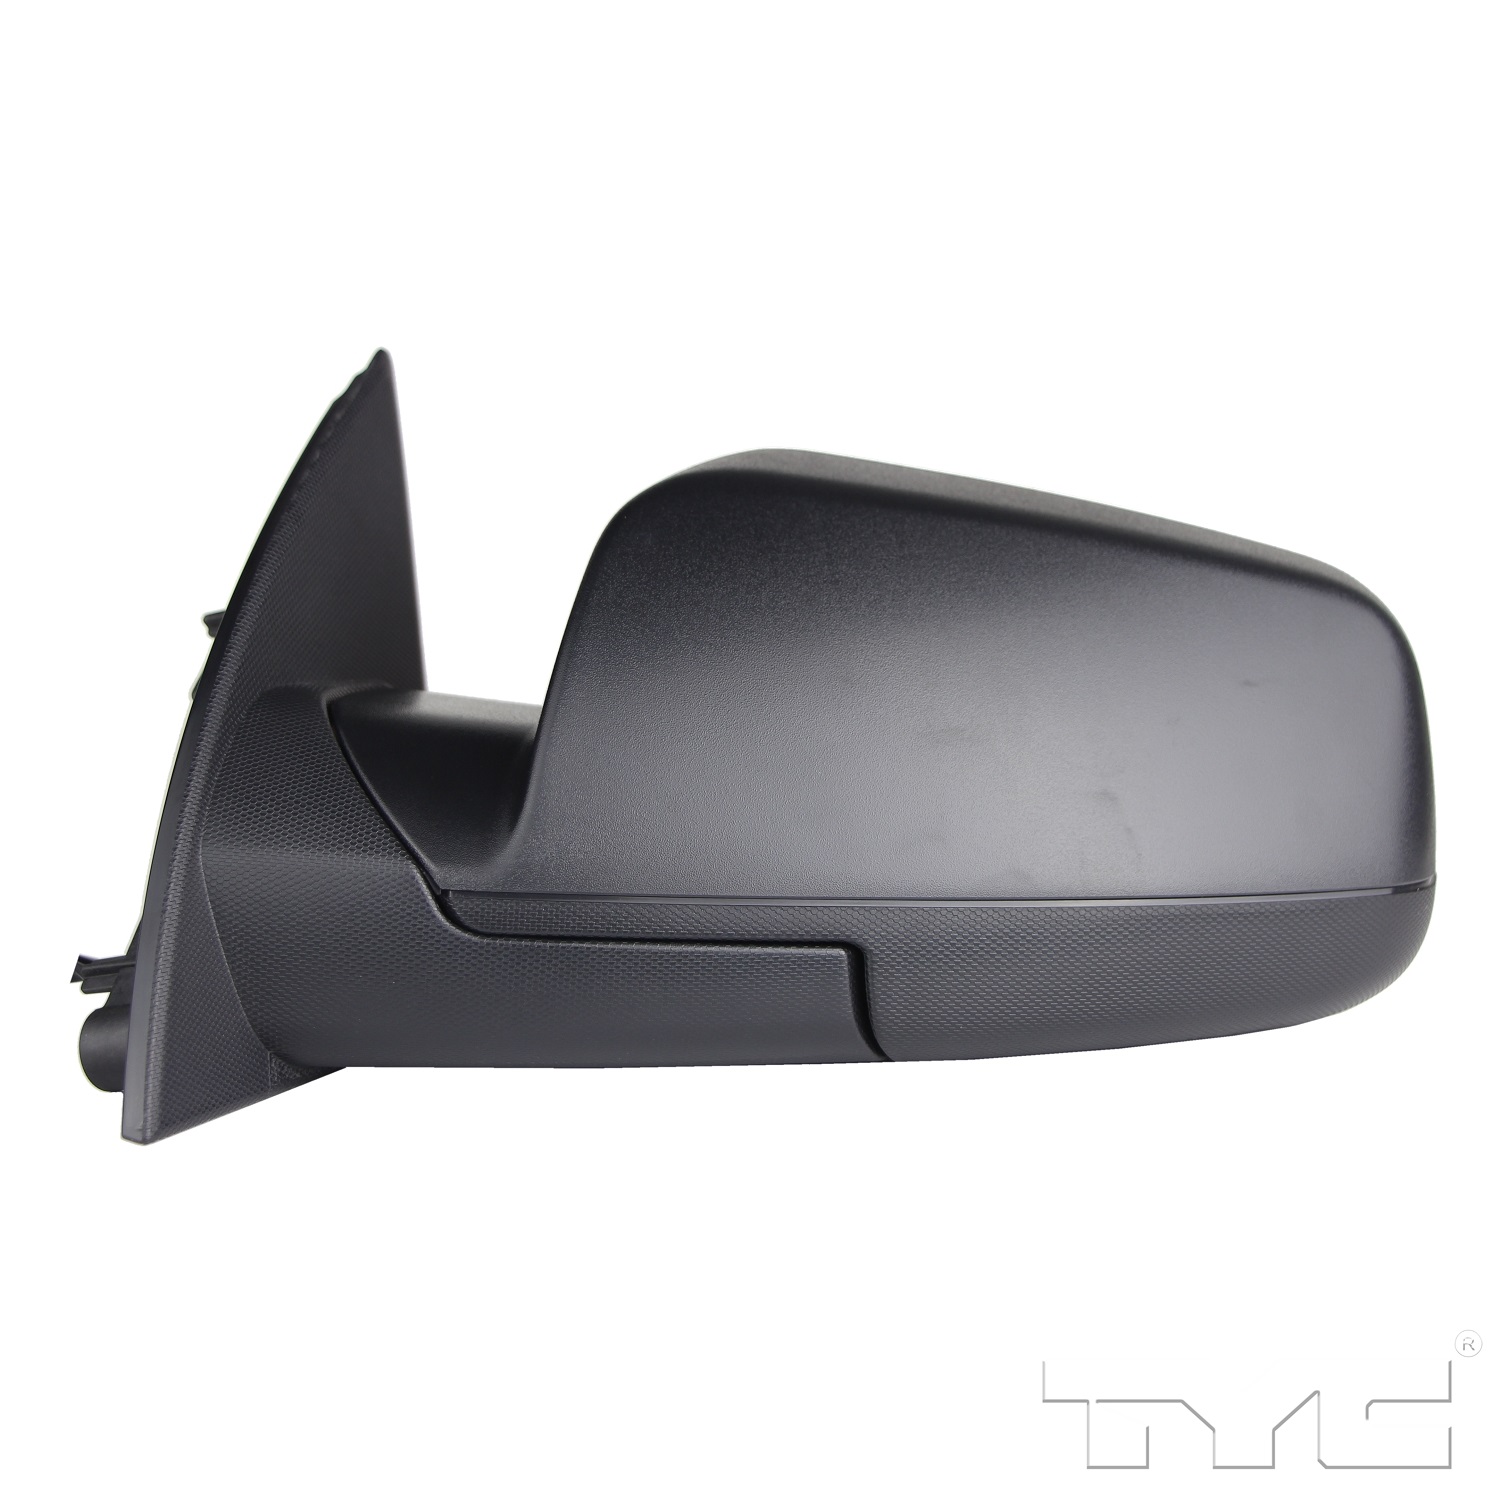 Aftermarket MIRRORS for CHEVROLET - EQUINOX, EQUINOX,10-11,LT Mirror outside rear view